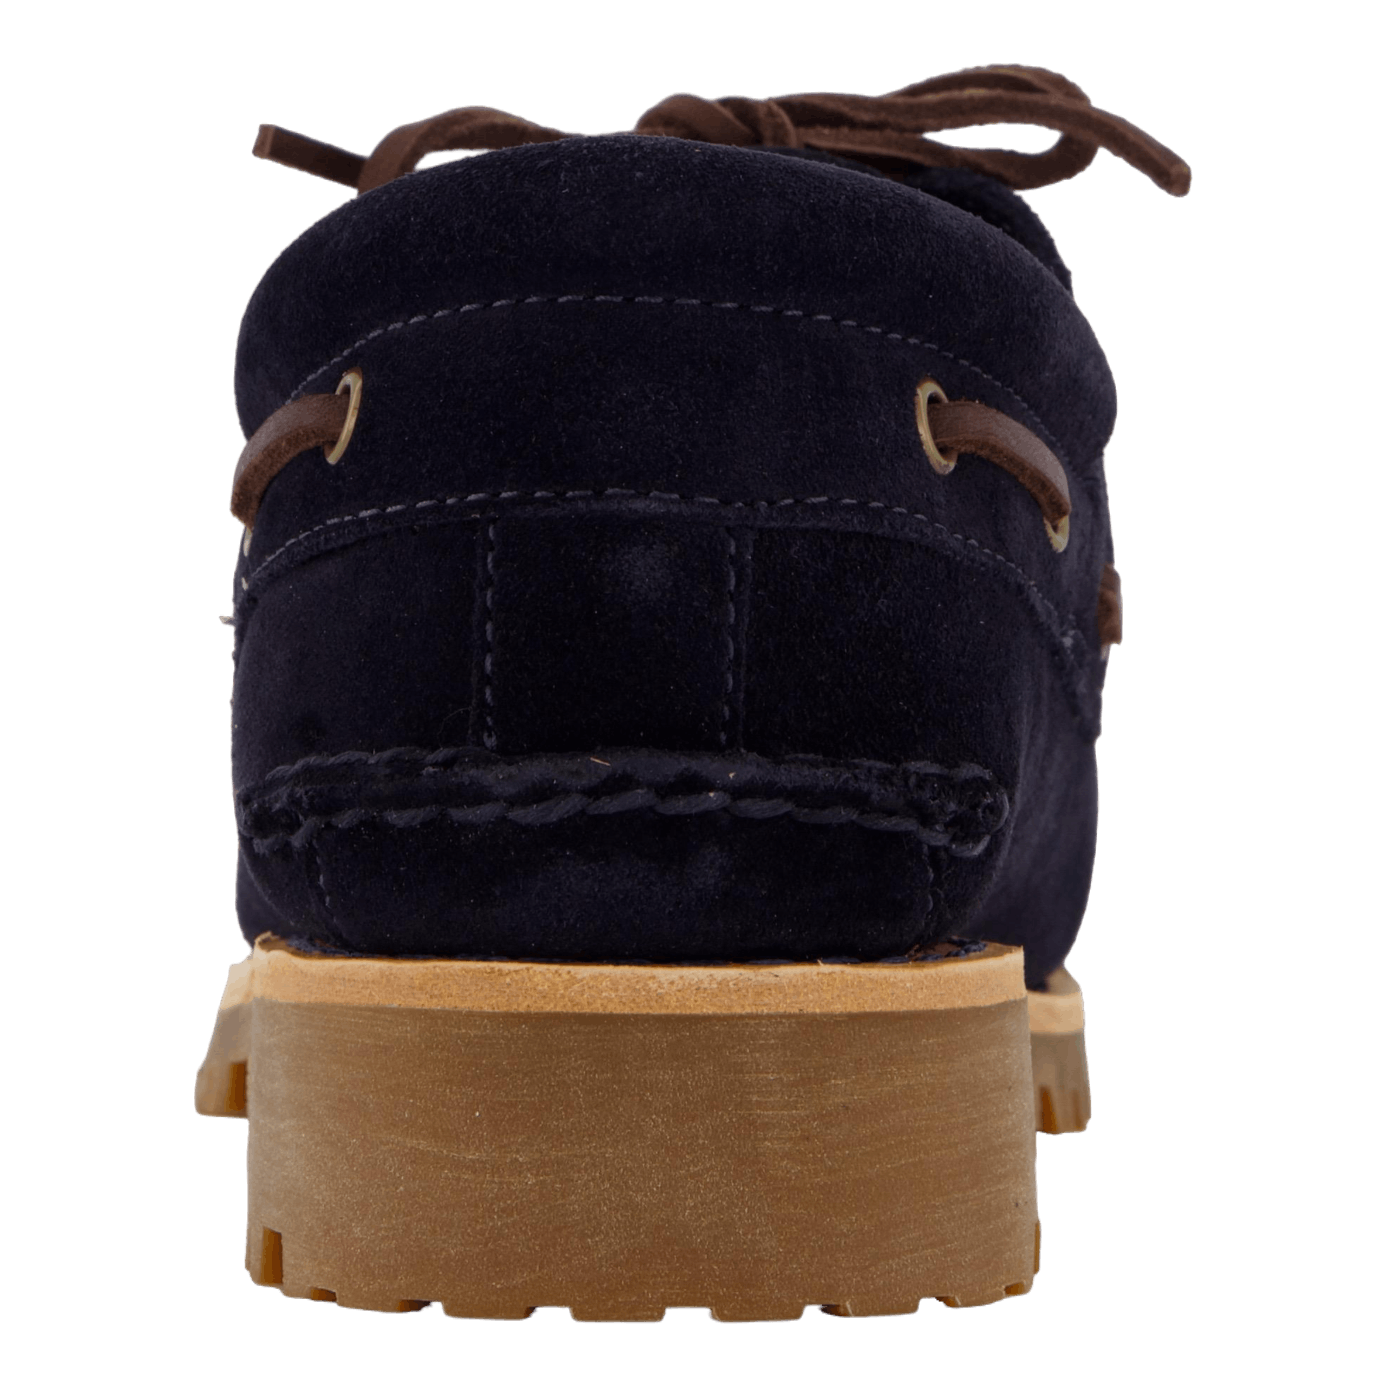 Timberland Authentic Boat Shoe Dark Blue Suede